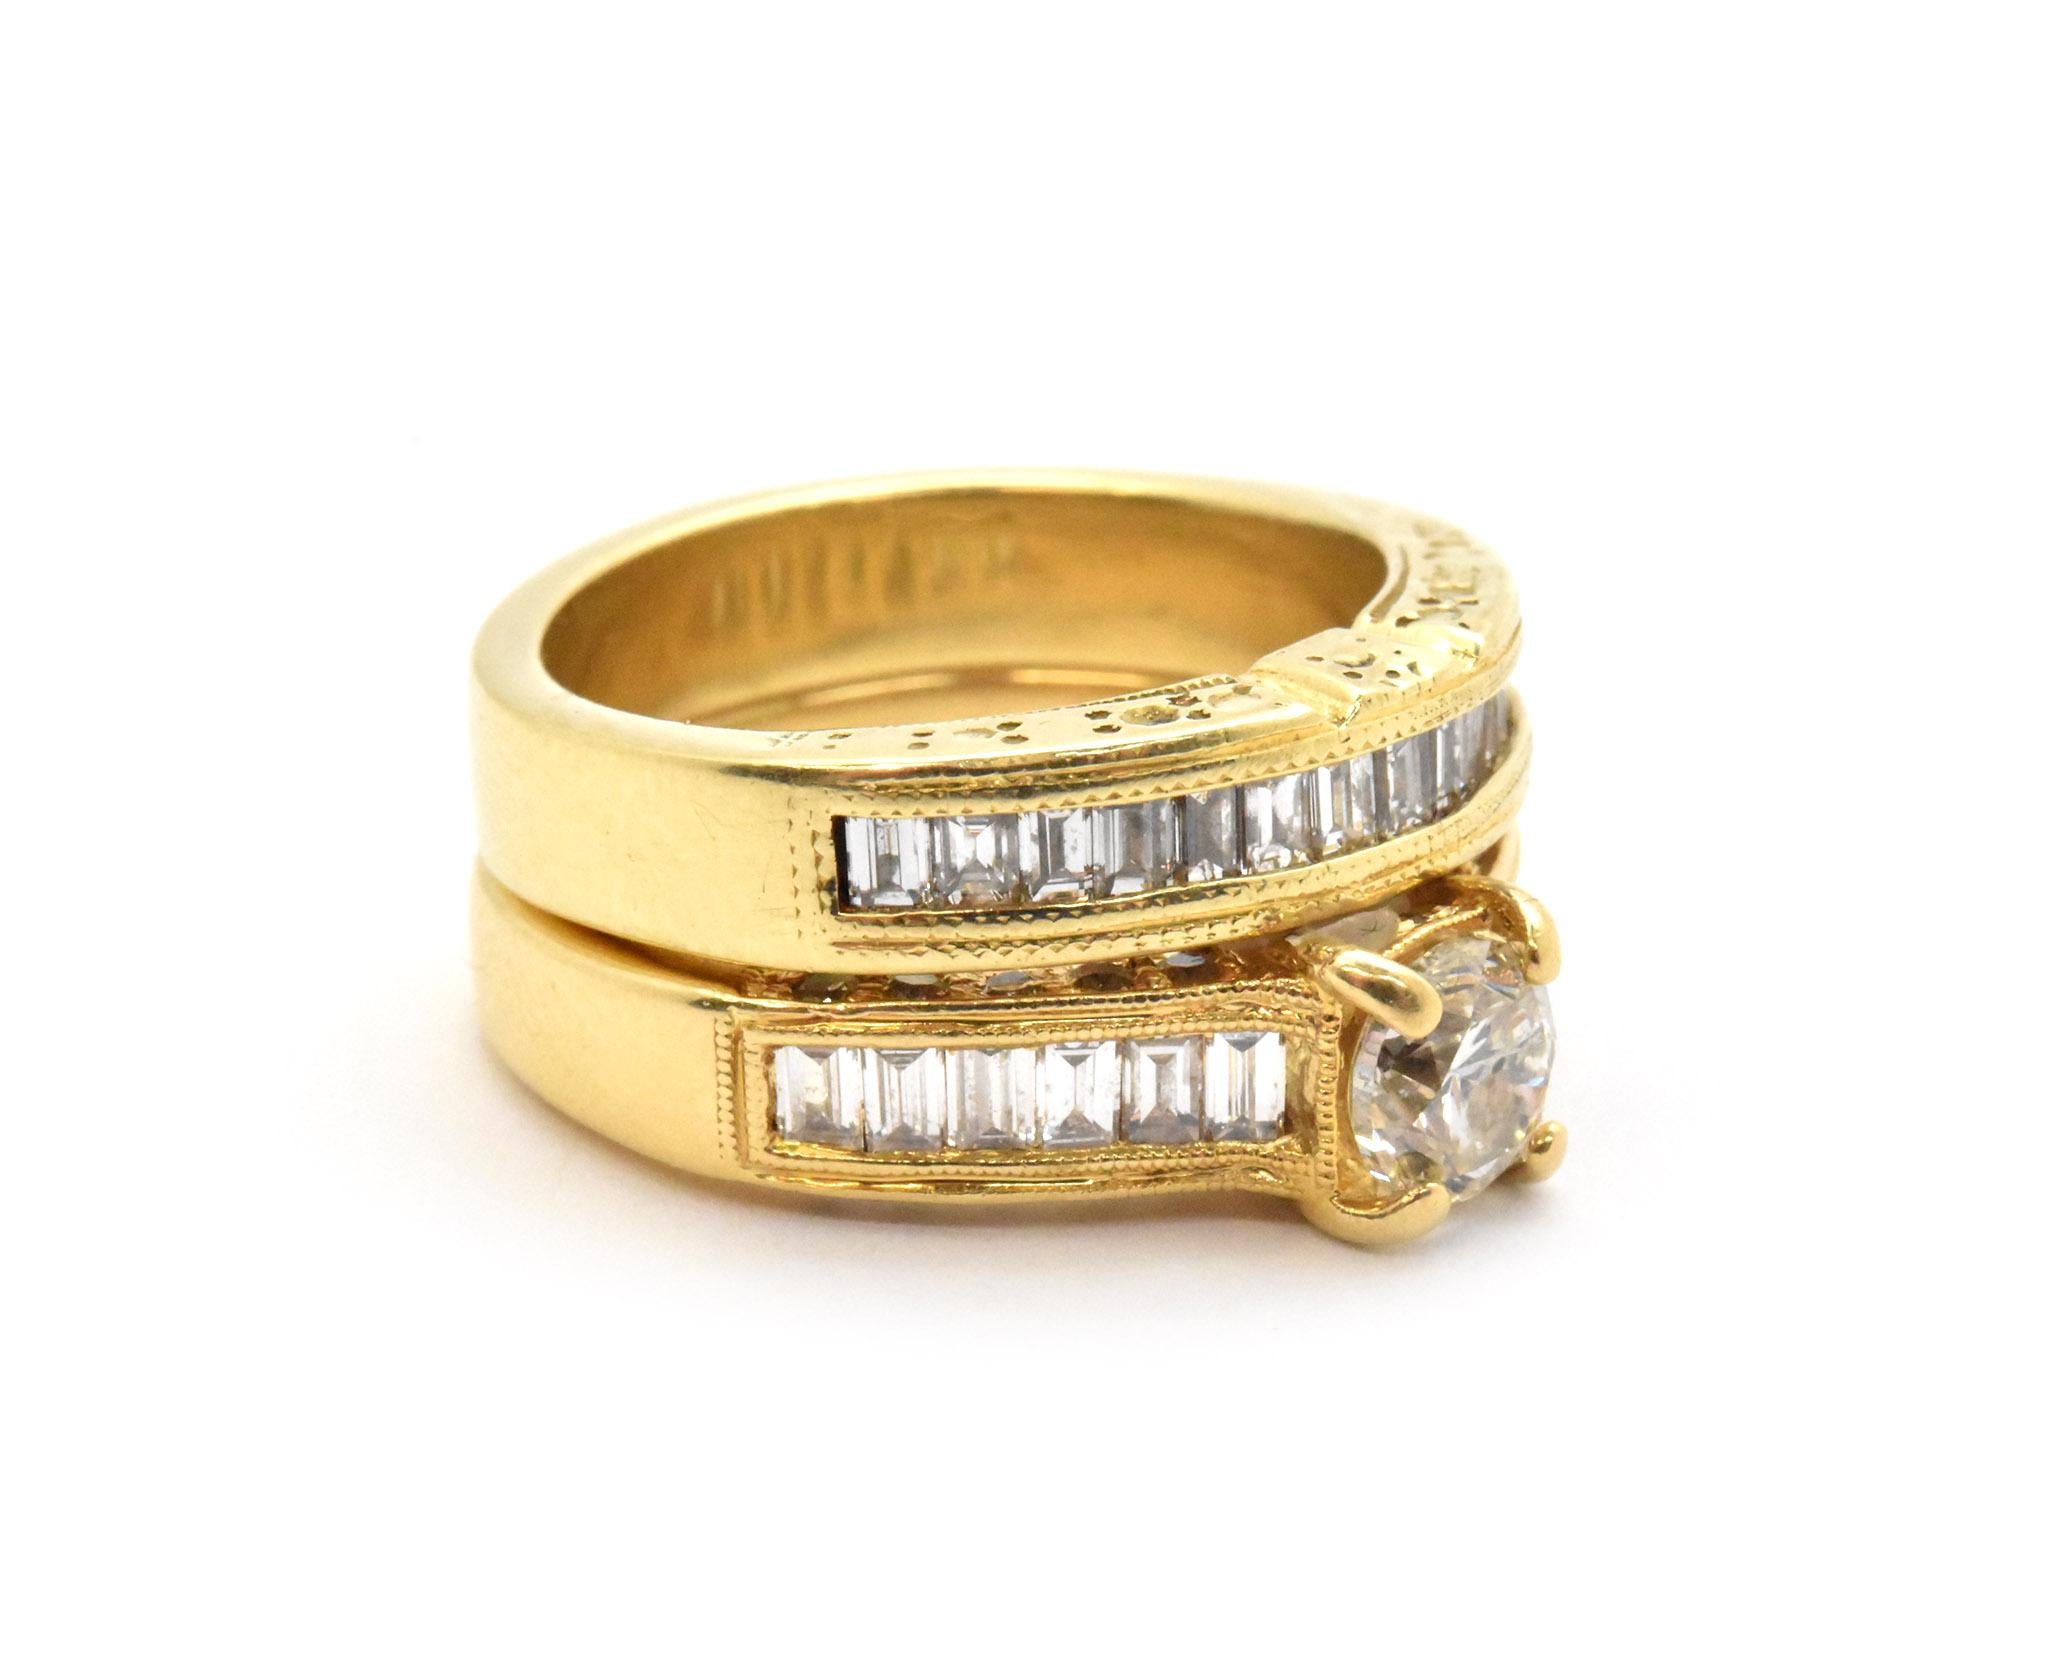 This momentous bridal set is made in 18k yellow gold and features a sparkling round brilliant 0.50ct diamond at the center of her engagement ring, set into the shoulder of each band in the wedding set are baguette diamonds. The center diamond in her